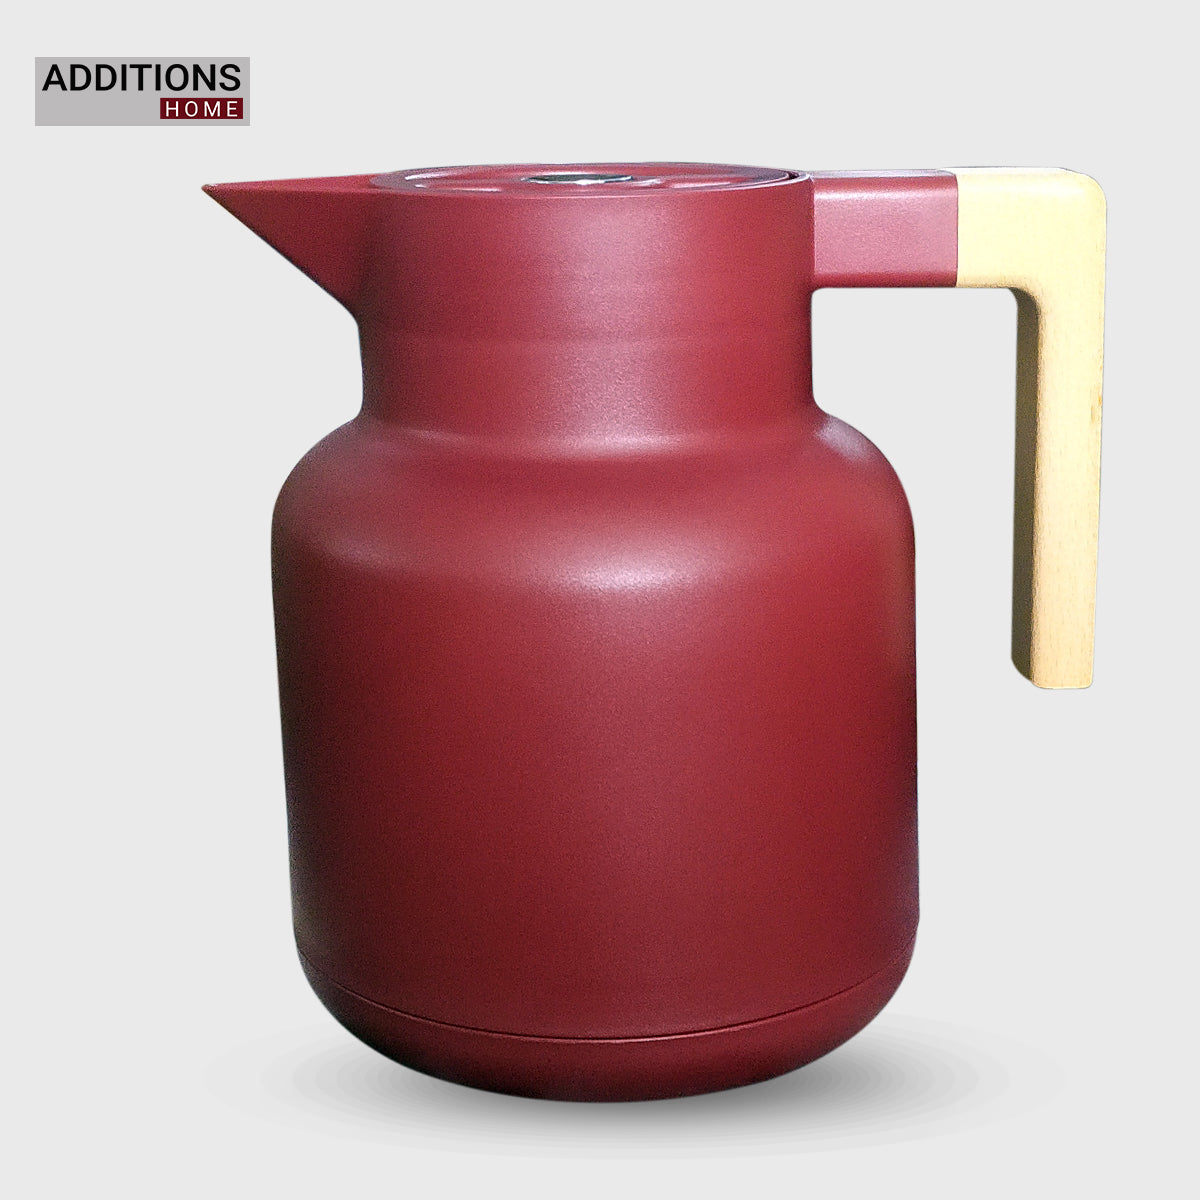 Vacuum Flask with Wooden Handle - 1 Ltr.